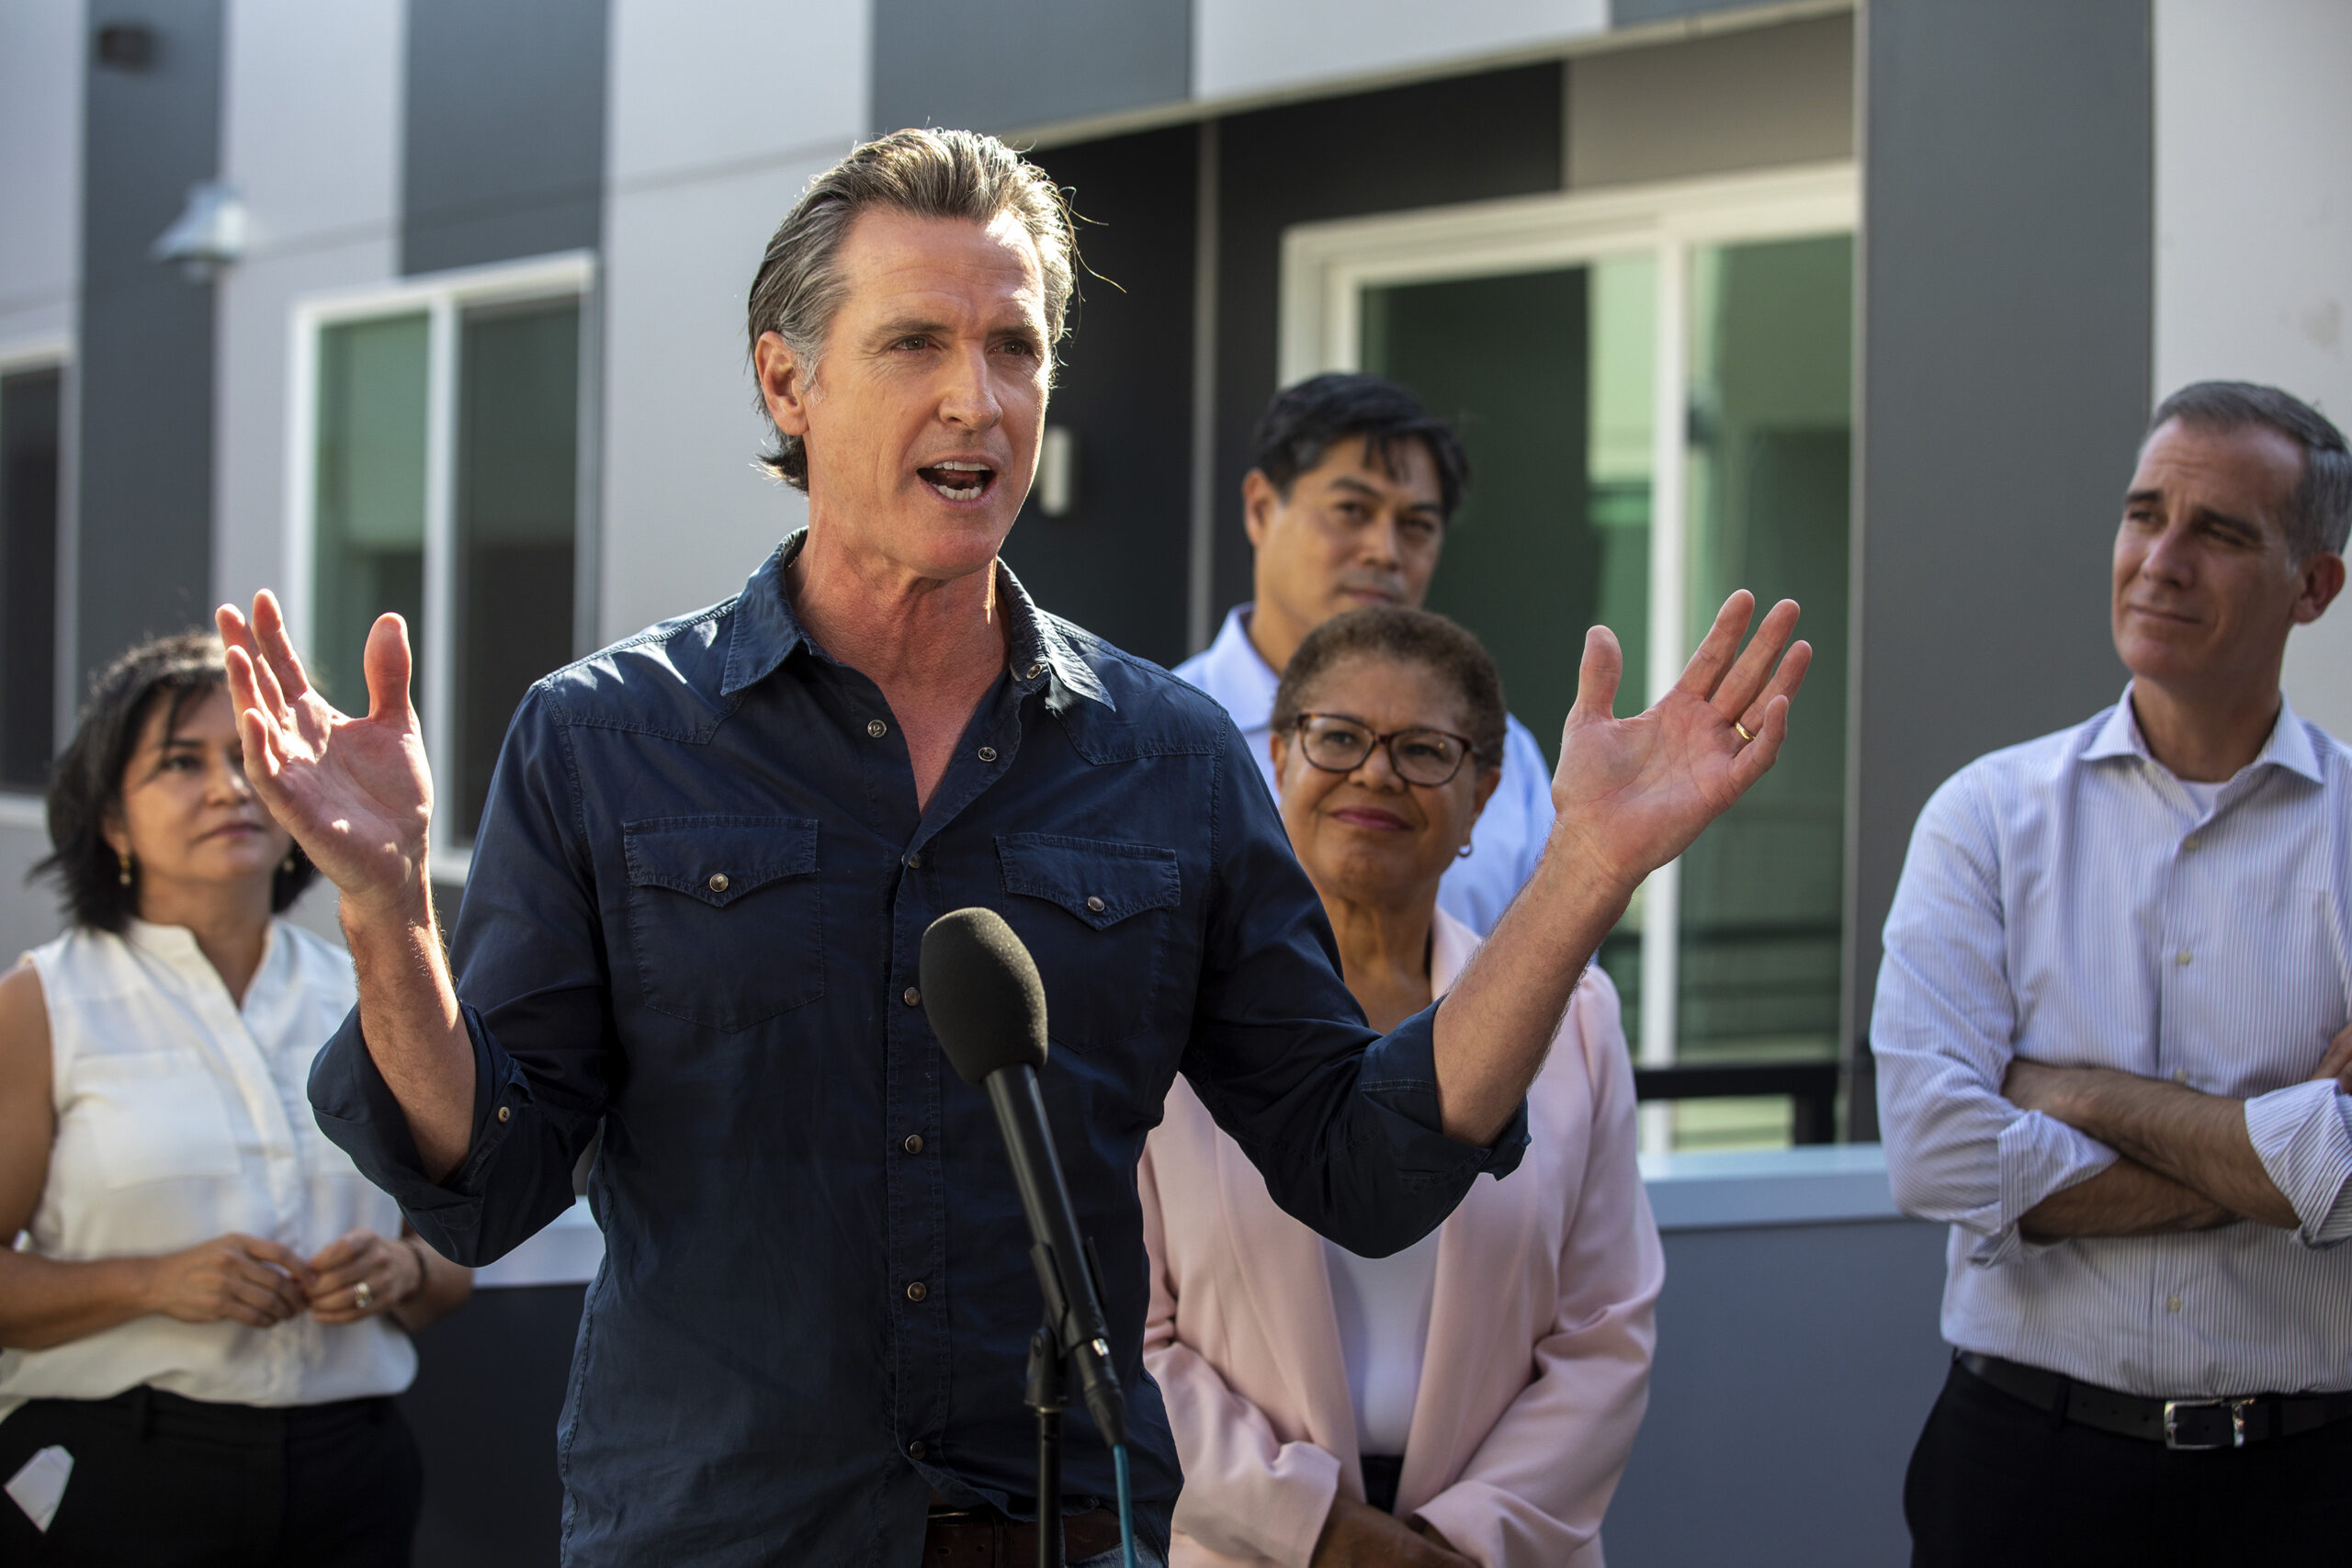 Hello, Governor: Newsom Faces Big Decisions as Legislators Pass New Laws on Hot-Button Issues